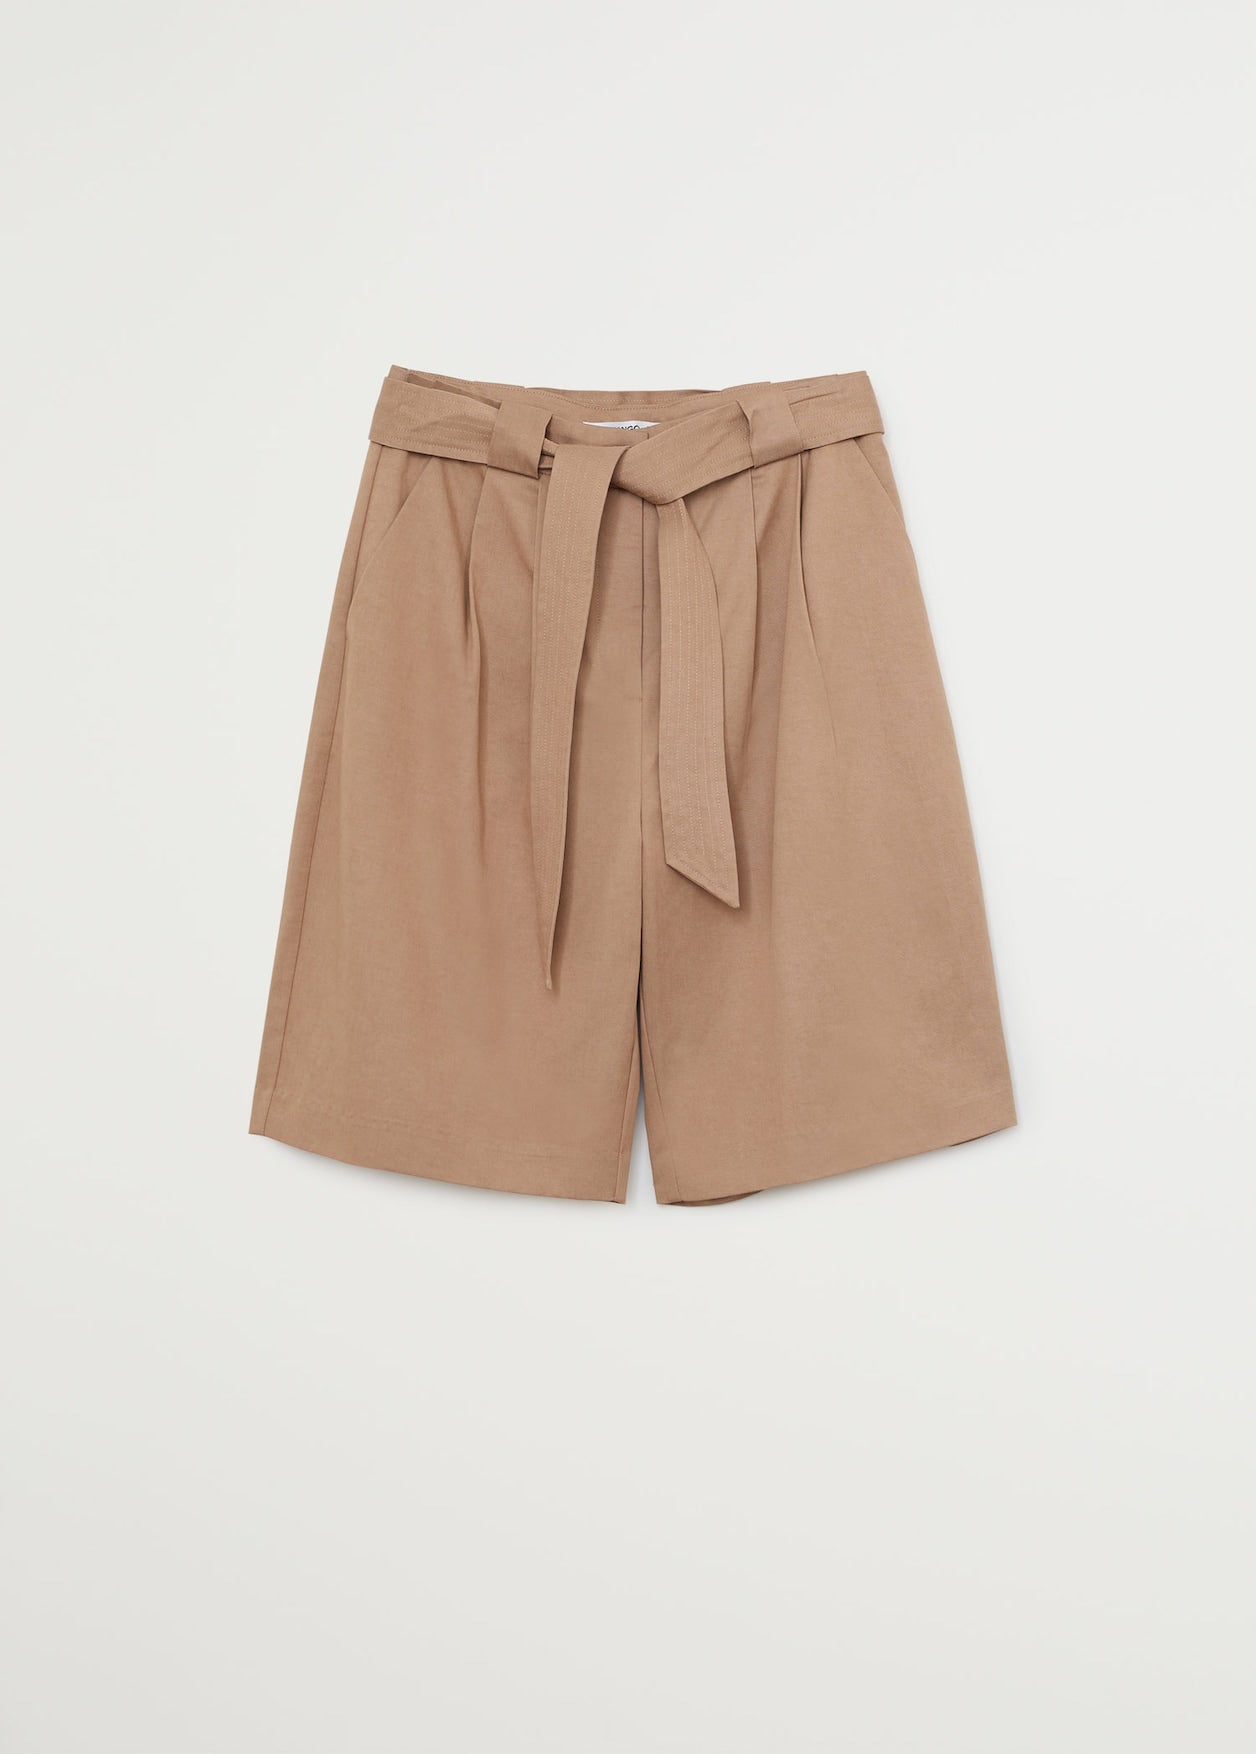 Soft bow short from Shorts collection you can buy now from Fashion And Icon online shop